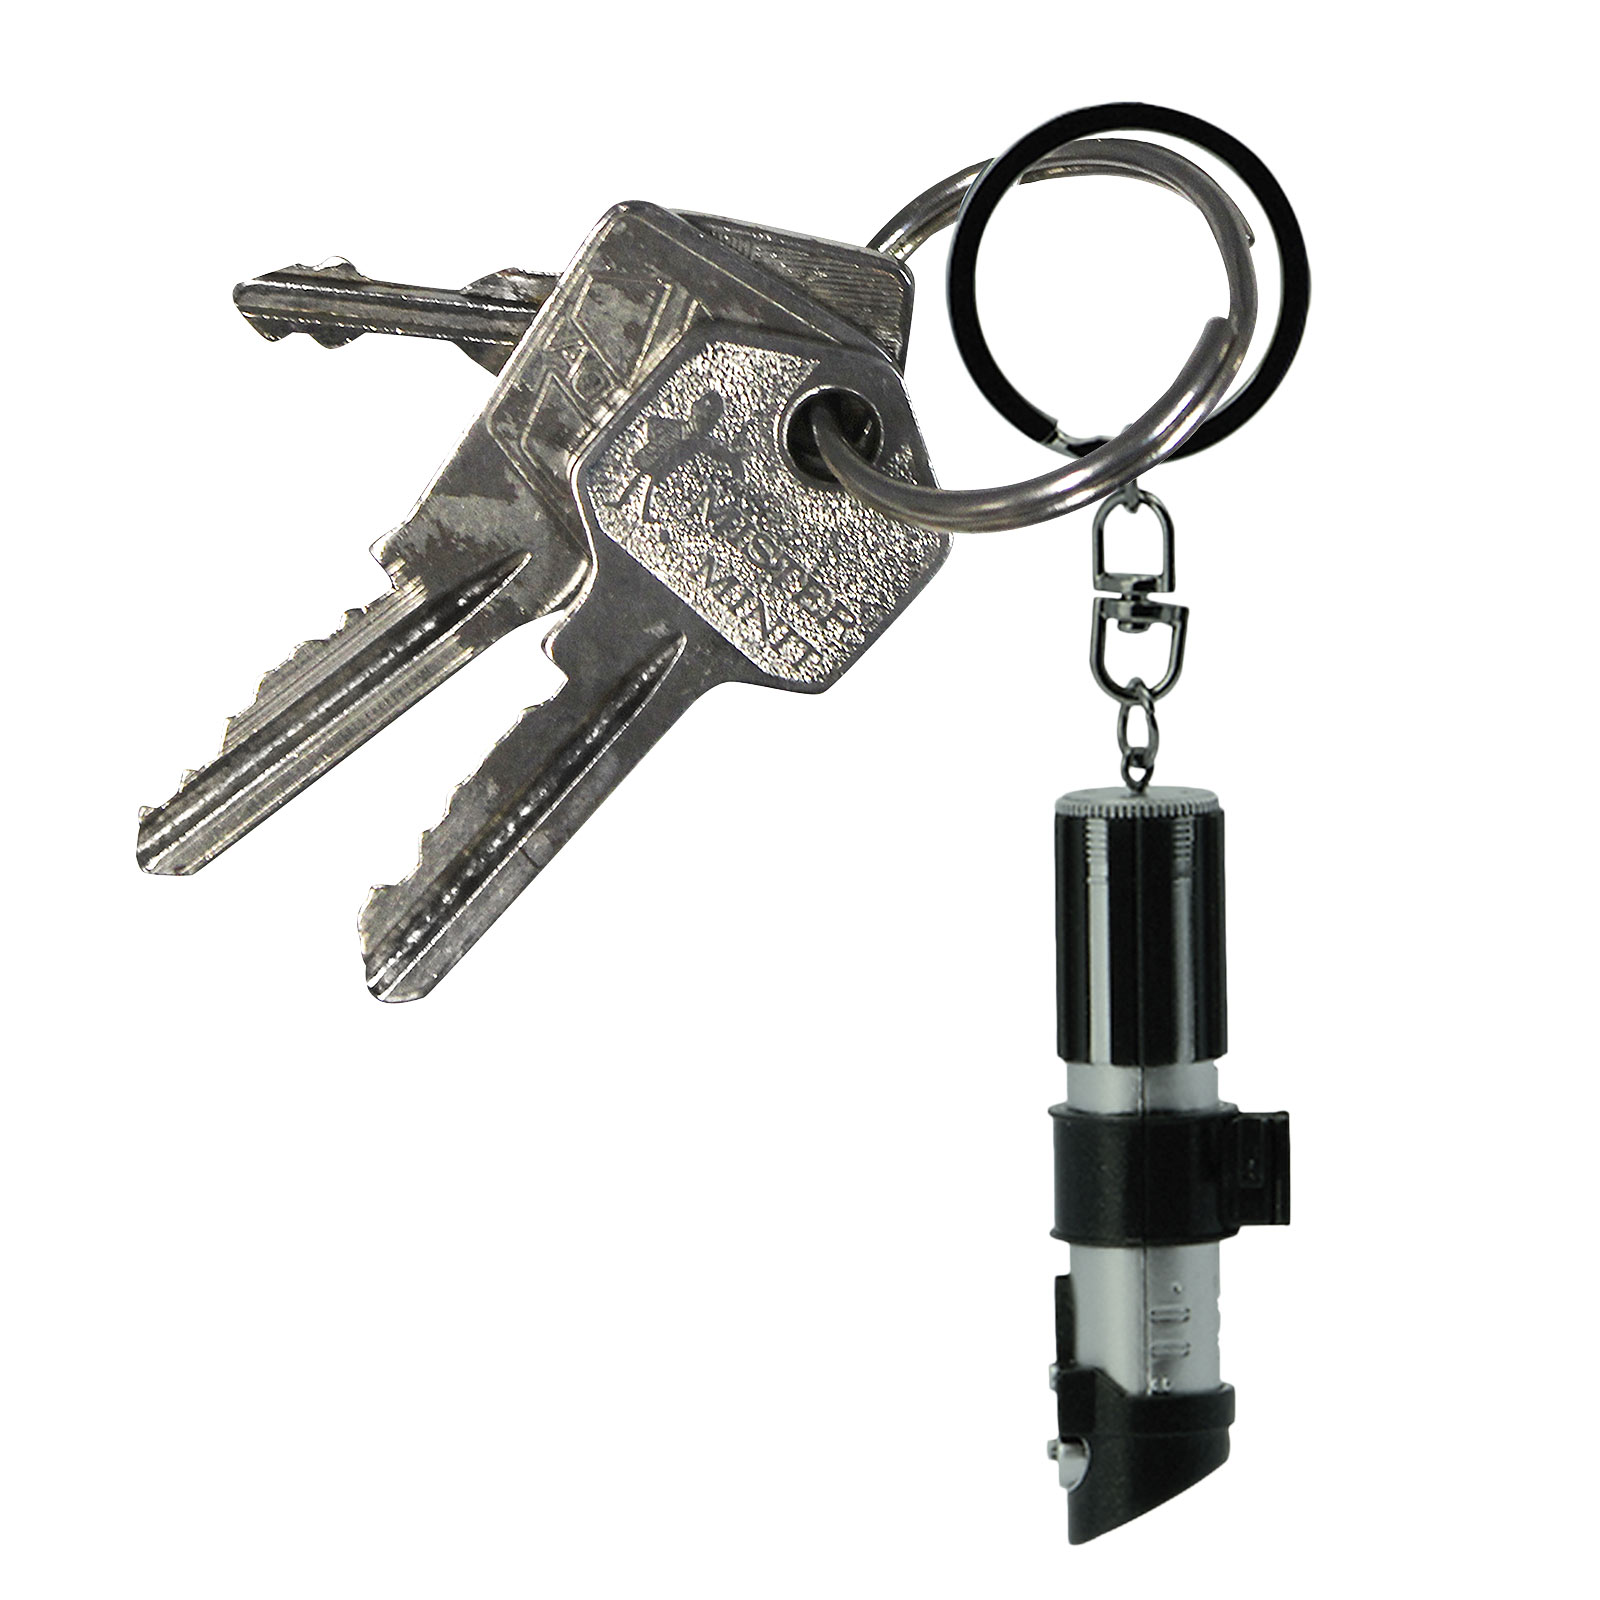 Darth Vader Lightsaber Keychain with Light and Sound - Star Wars